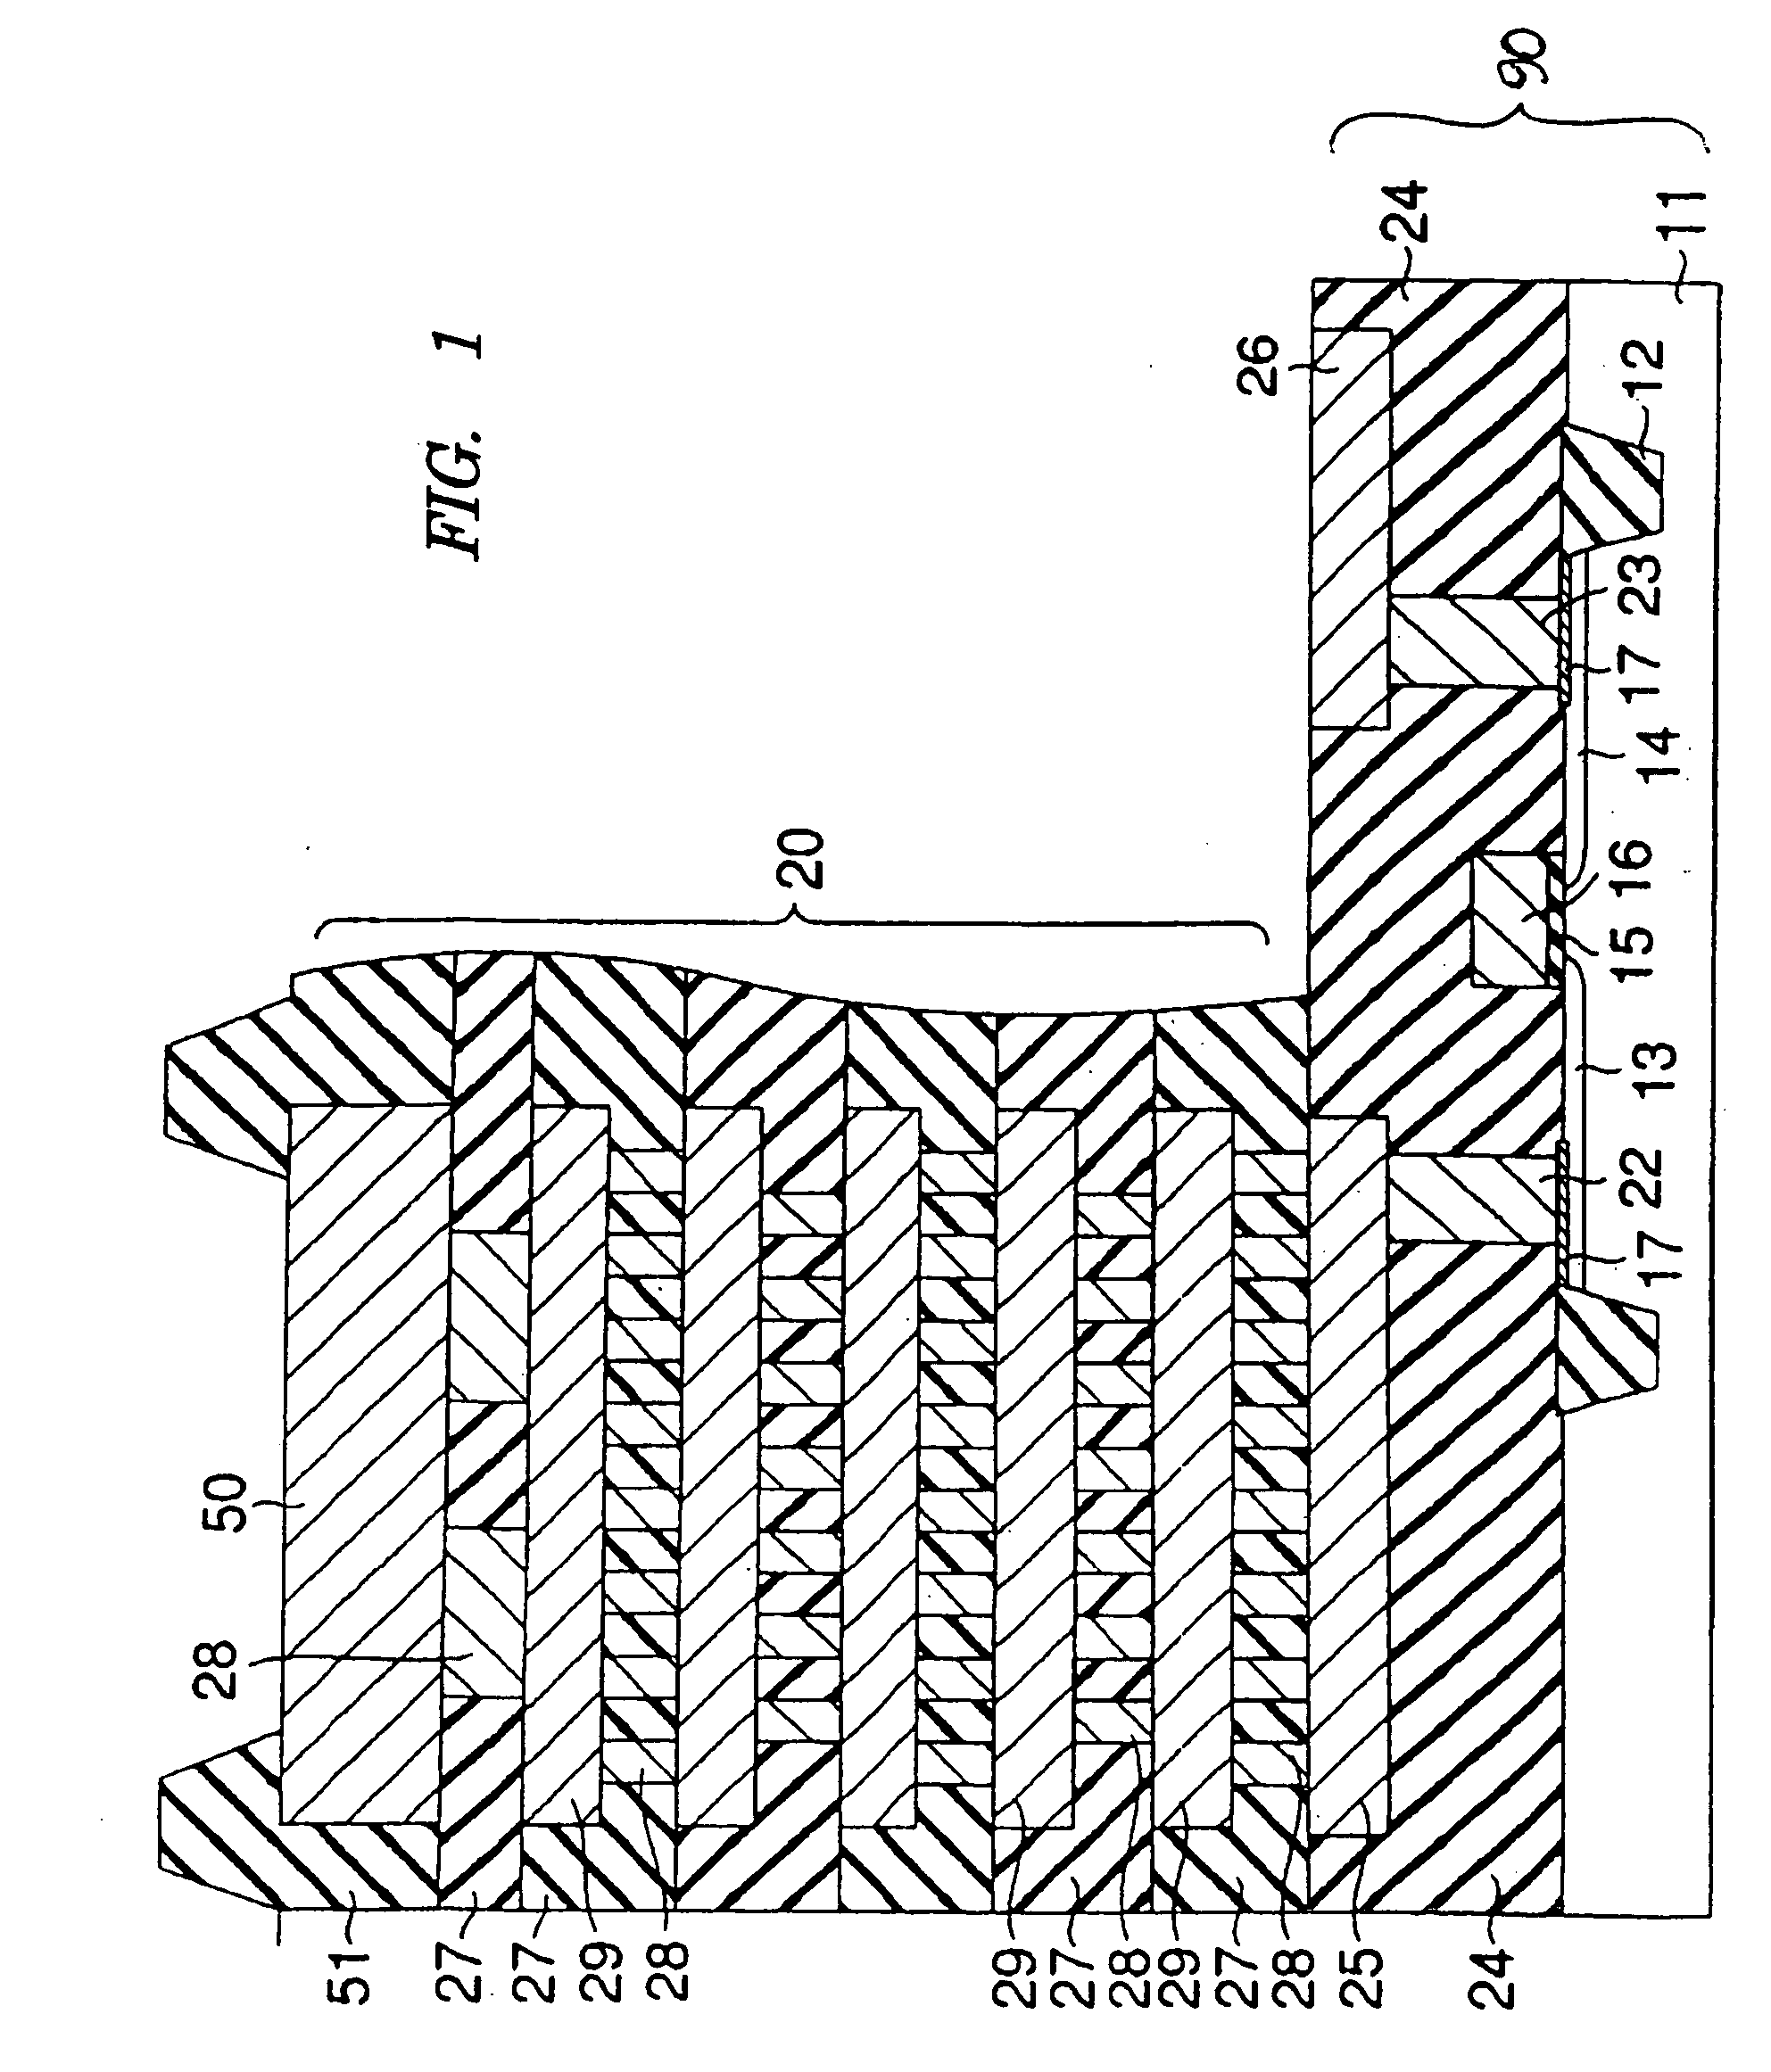 Semiconductor apparatus including a radiator for diffusing the heat generated therein